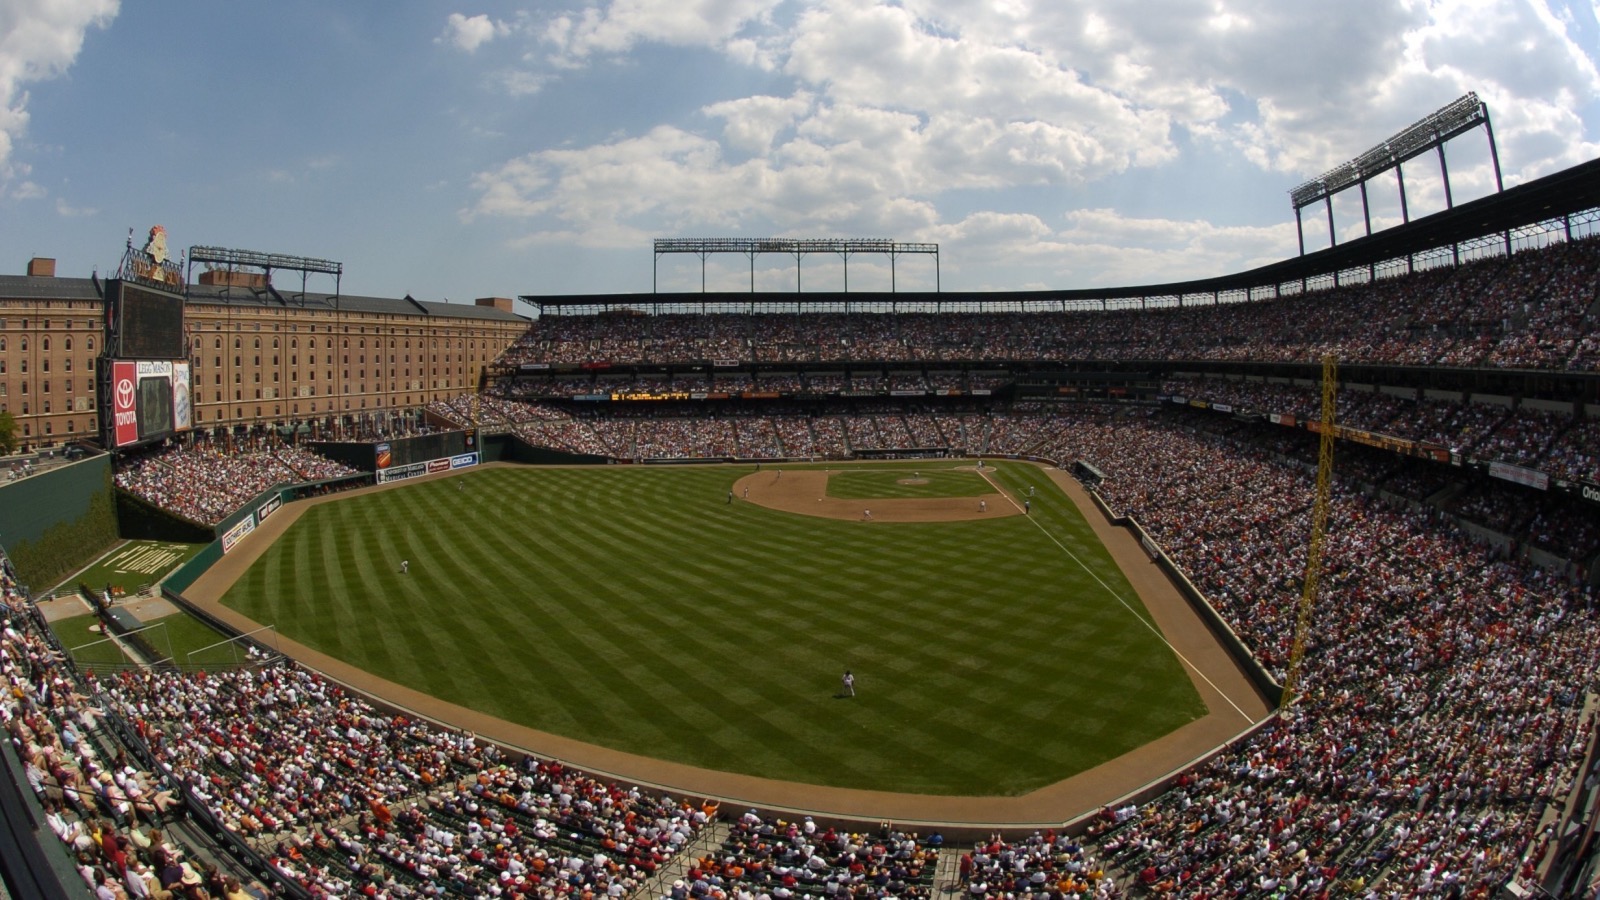 Could the Orioles Leave Camden Yards? - Stadium